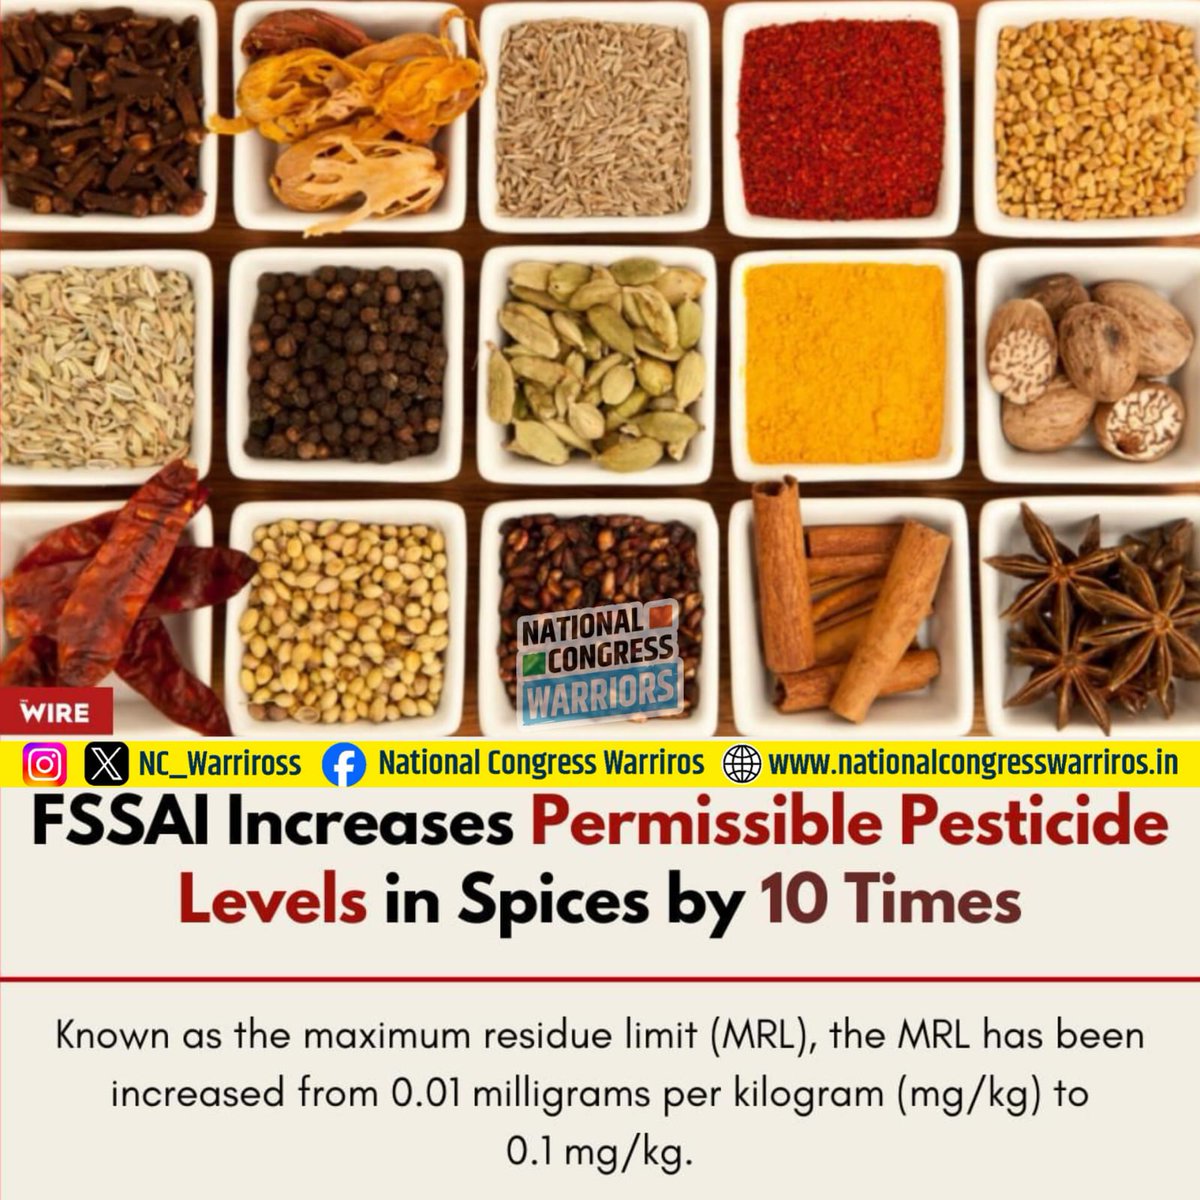 FSSAI increases permissible pesticide levels in spices by 10 Times.

#NYAY_KA_PATH_AGNIPATH 
#RahulKoLaoDeshBachao